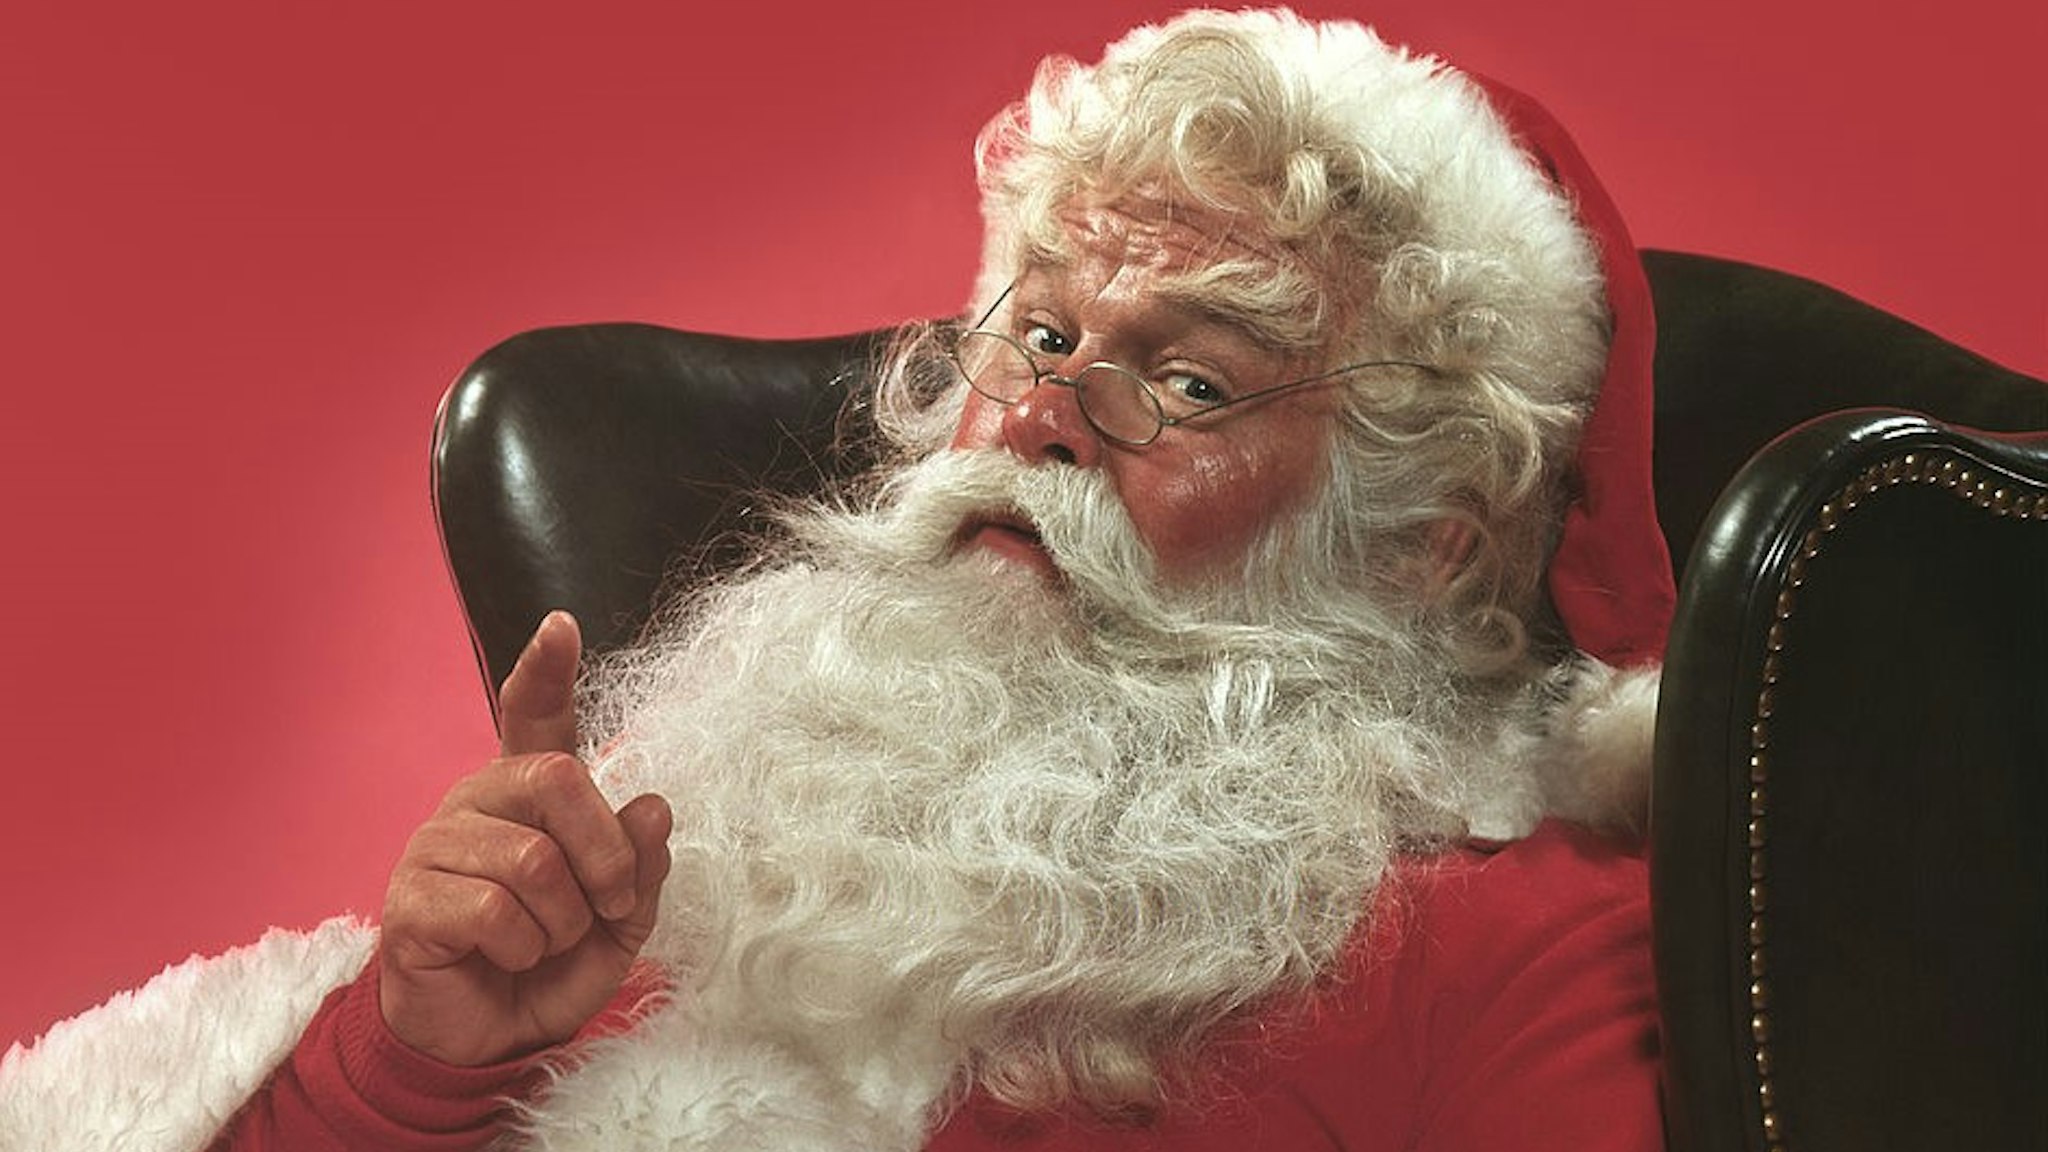 Portrait of Santa Claus sitting in a leather armchair raising one hand in a knowing gesture, 1980. United States. (Photo by T